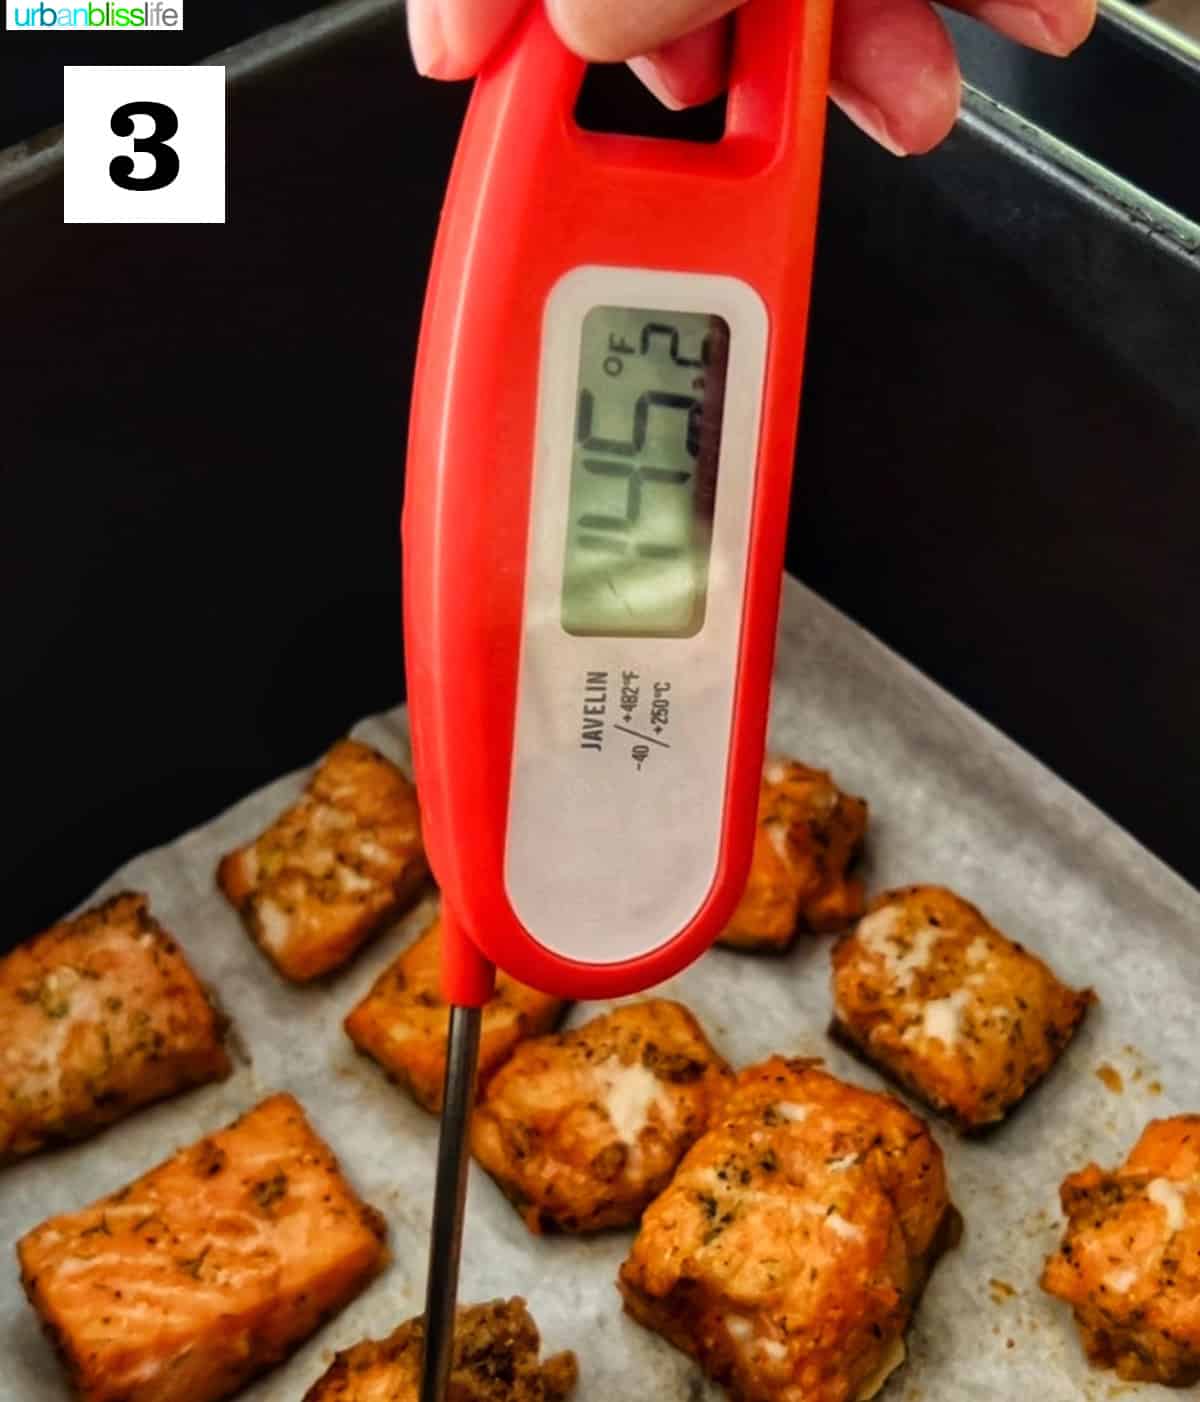 meat thermometer reading 145 degrees going into air fryer salmon bites.